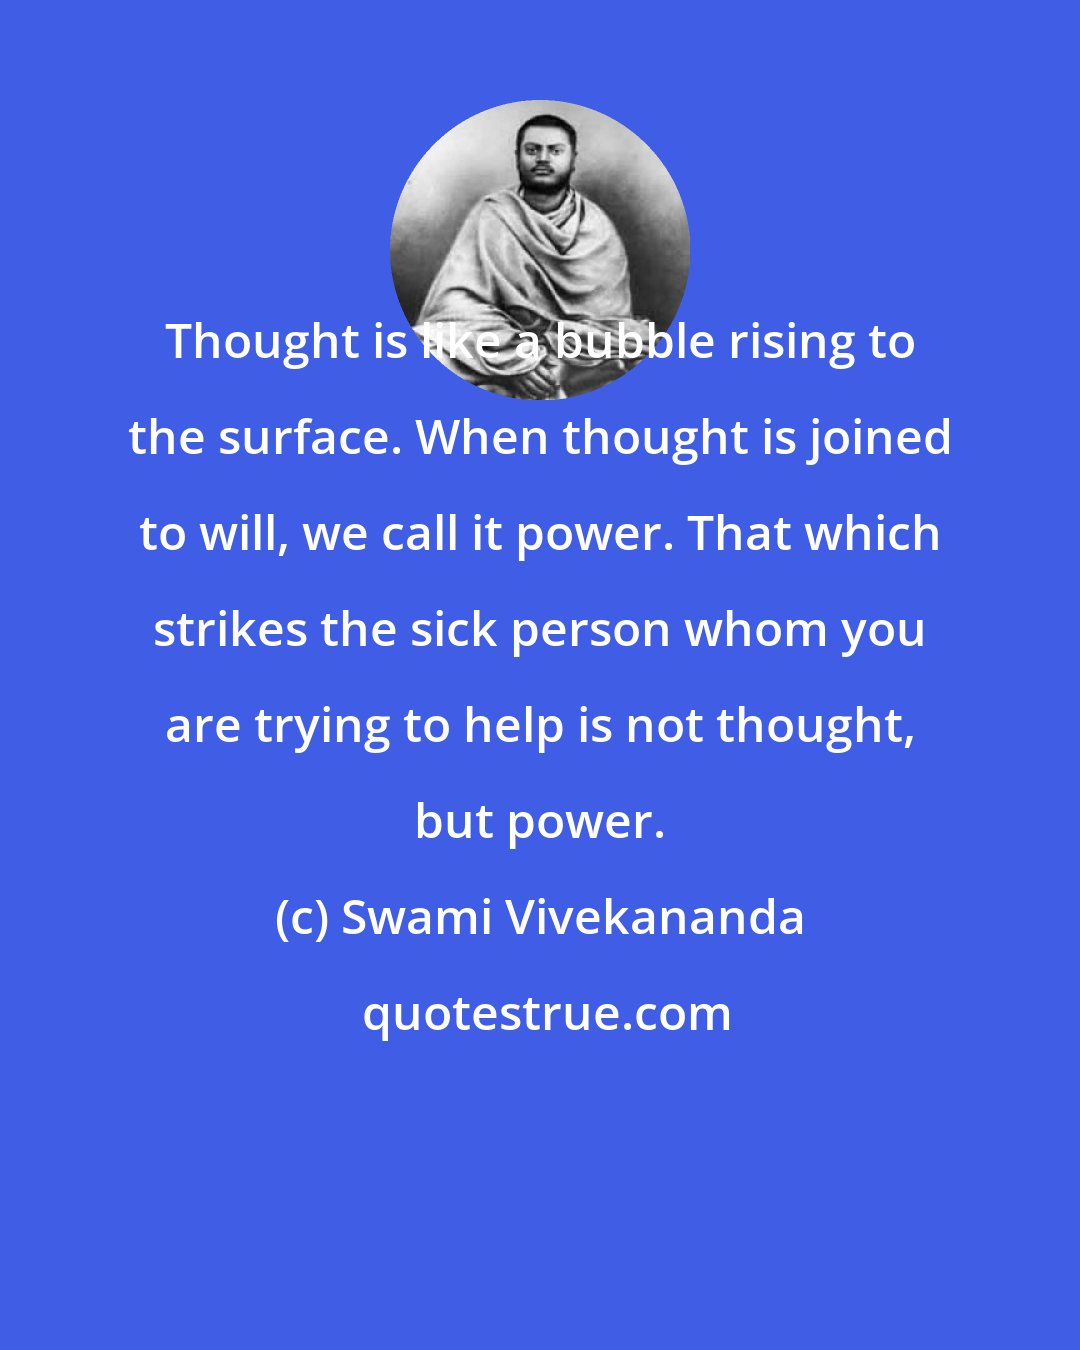 Swami Vivekananda: Thought is like a bubble rising to the surface. When thought is joined to will, we call it power. That which strikes the sick person whom you are trying to help is not thought, but power.